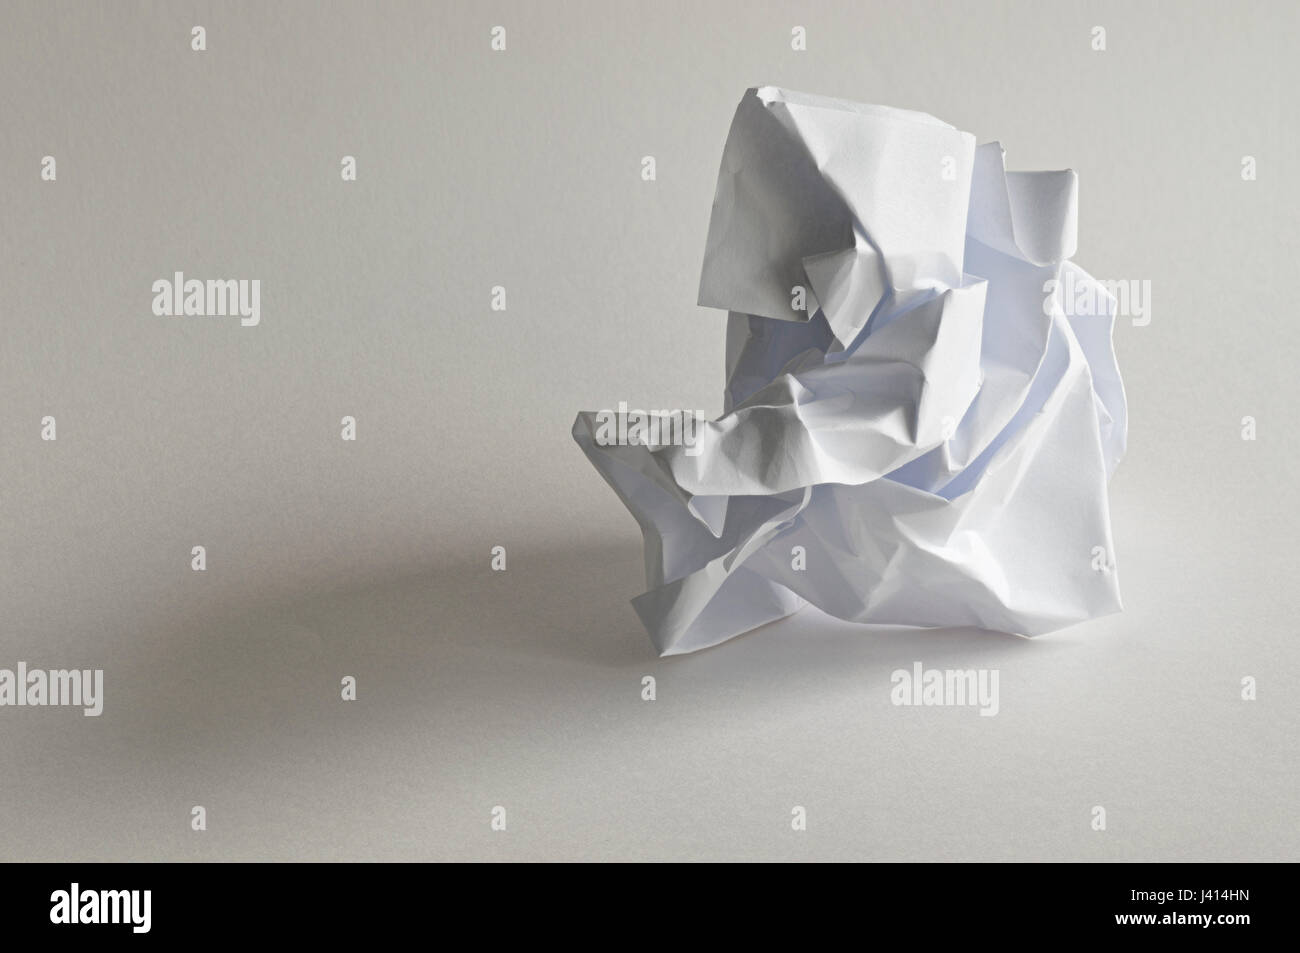 Focus-stacked study of crumpled ball of paper resembling meditating monk, natural light, white paper background with subtle colours in shadows. Stock Photo